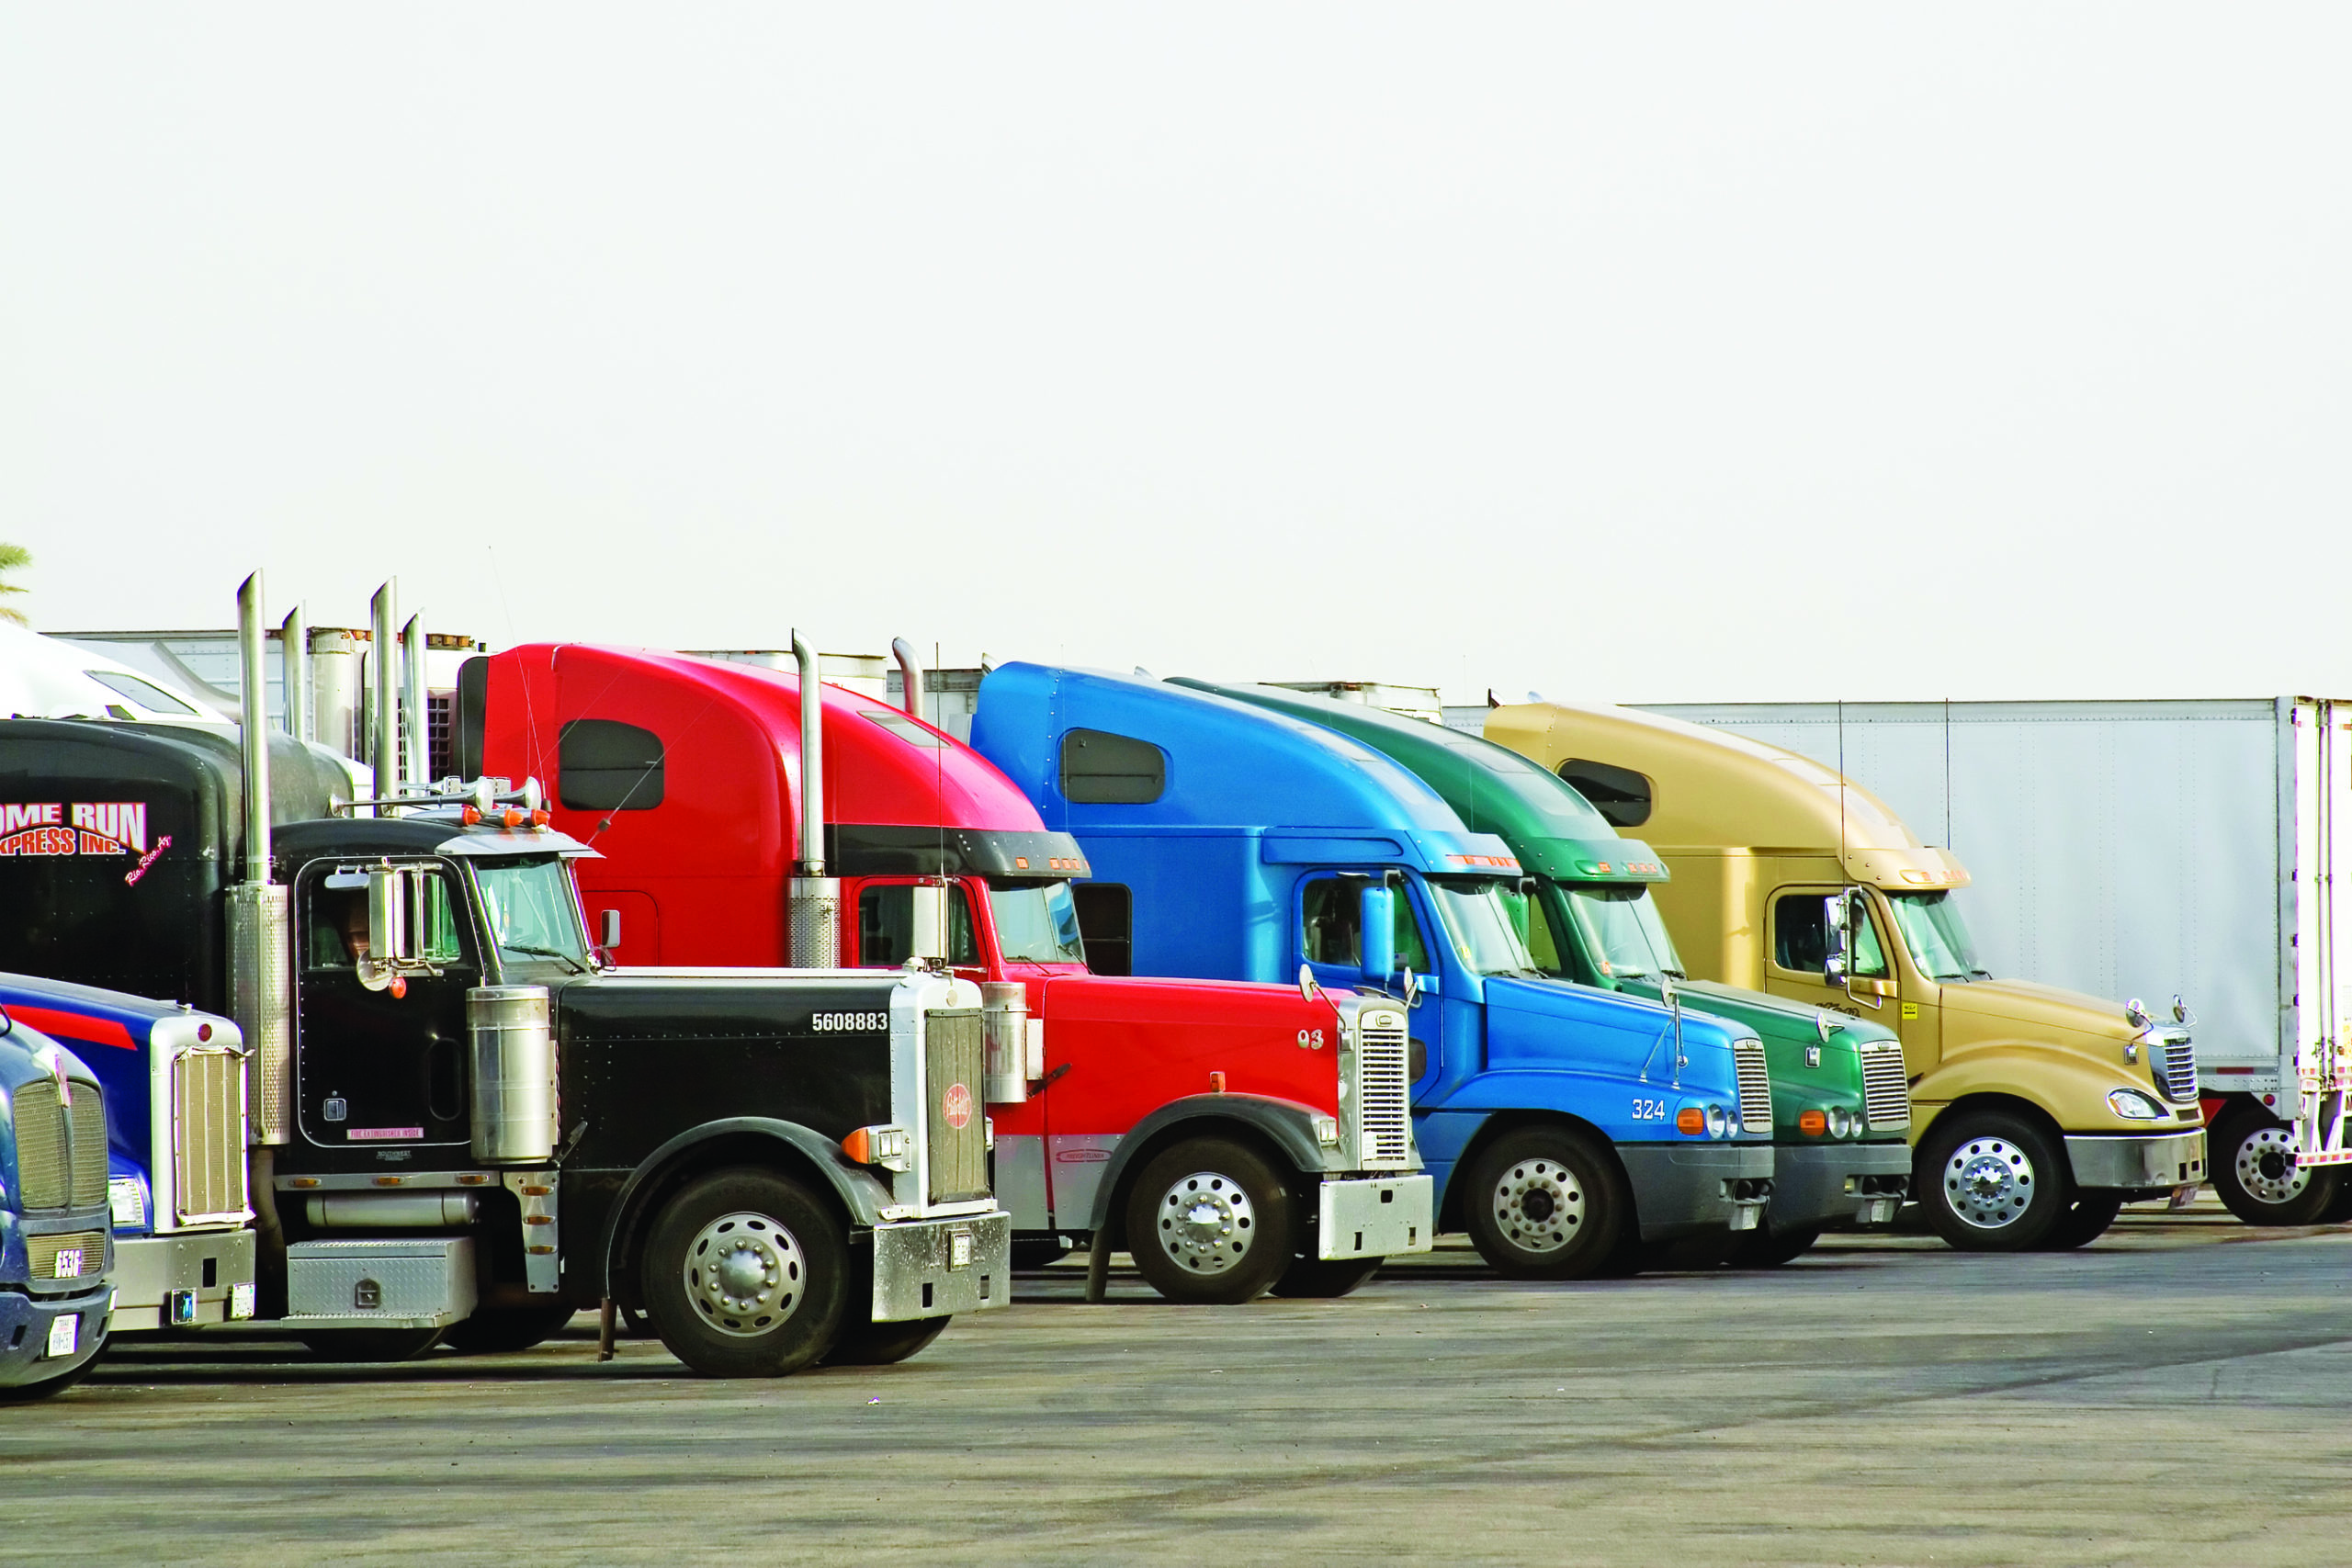 Multi-colored trucks staggered in a line